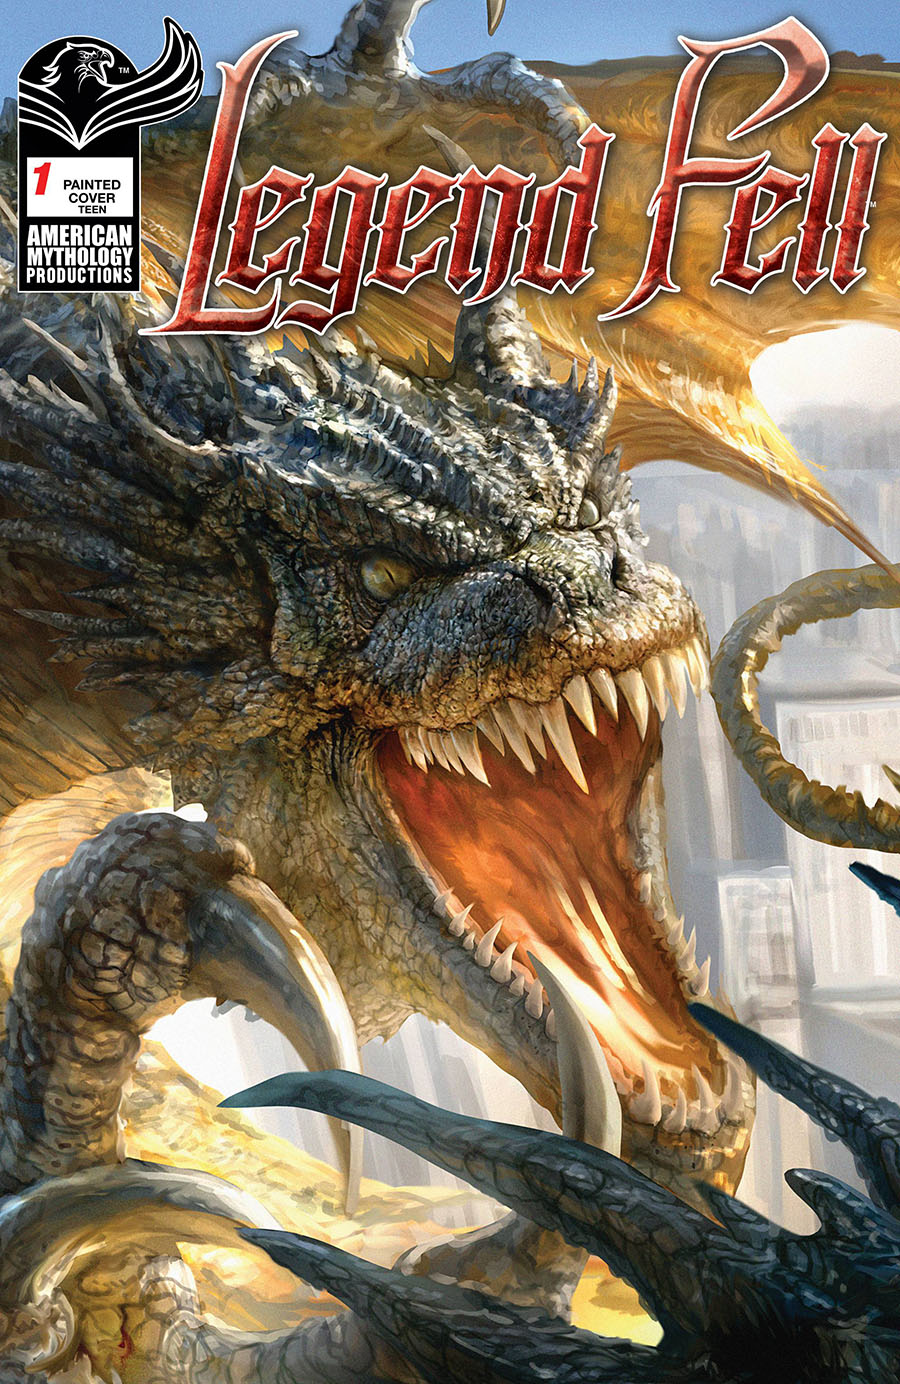 Legend Fell #1 Cover E Variant Dragon Painted Cover